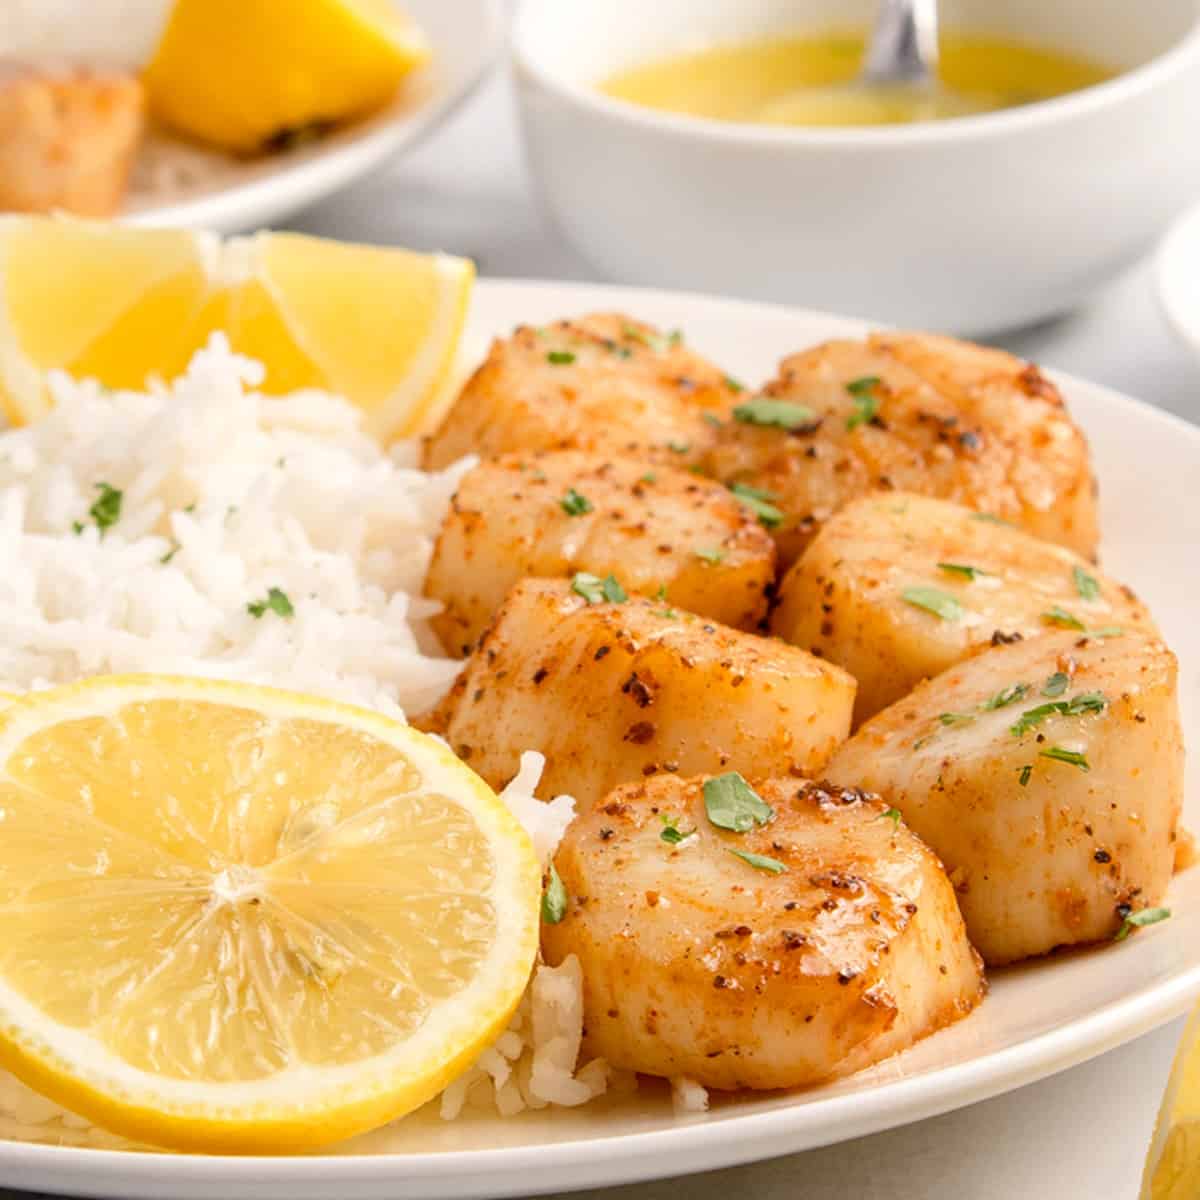 A plate of scallops and rice with lemon wedges.